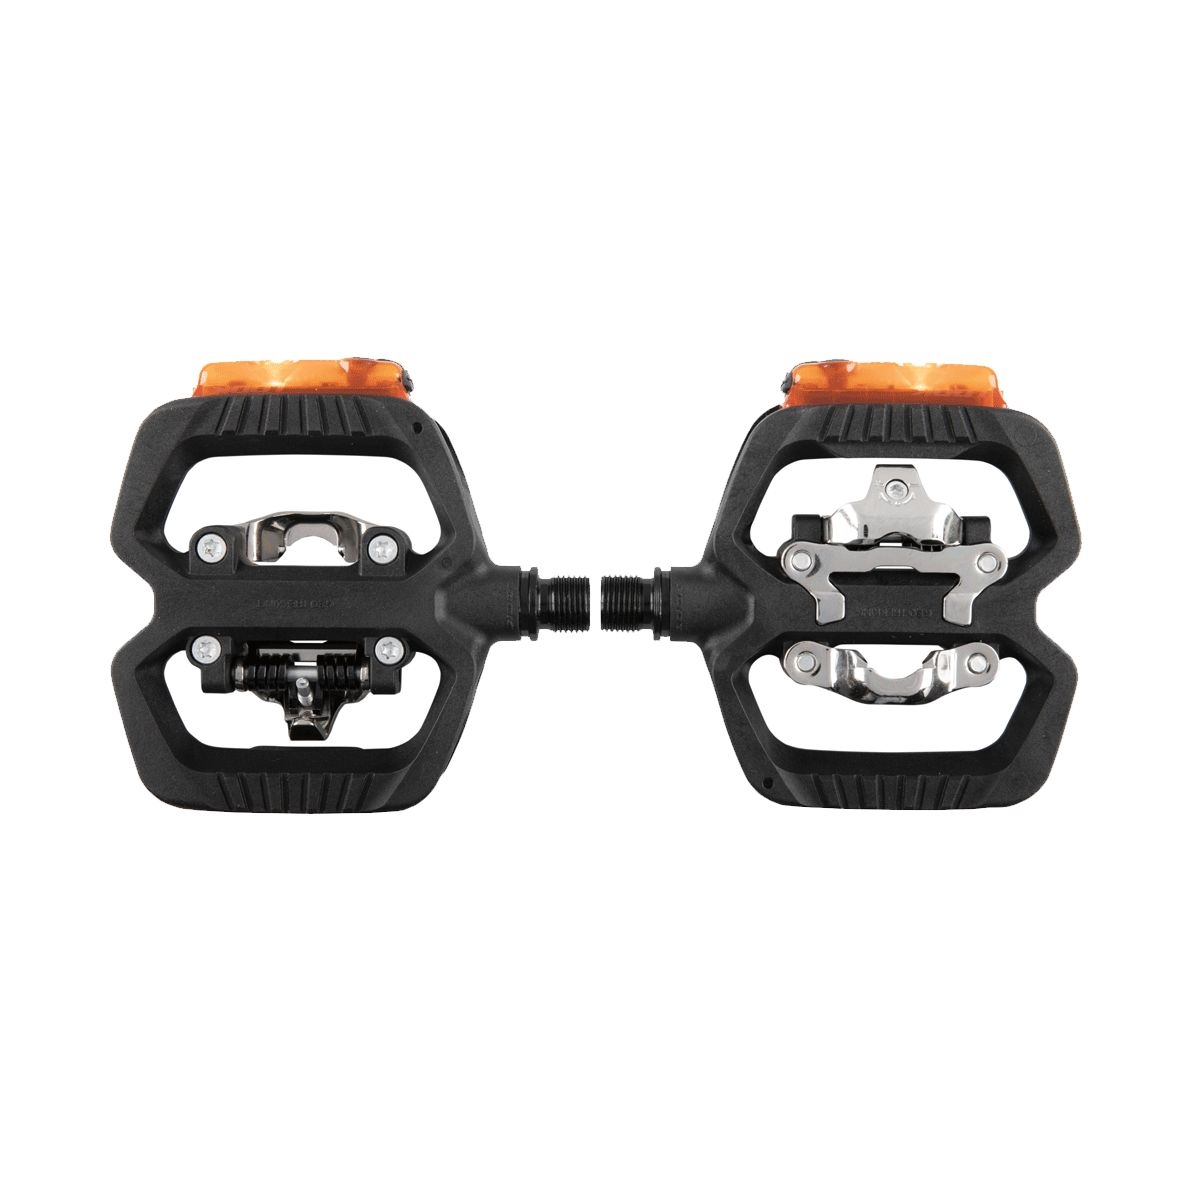 Double function Geo Trekking Vision light pedals 2020